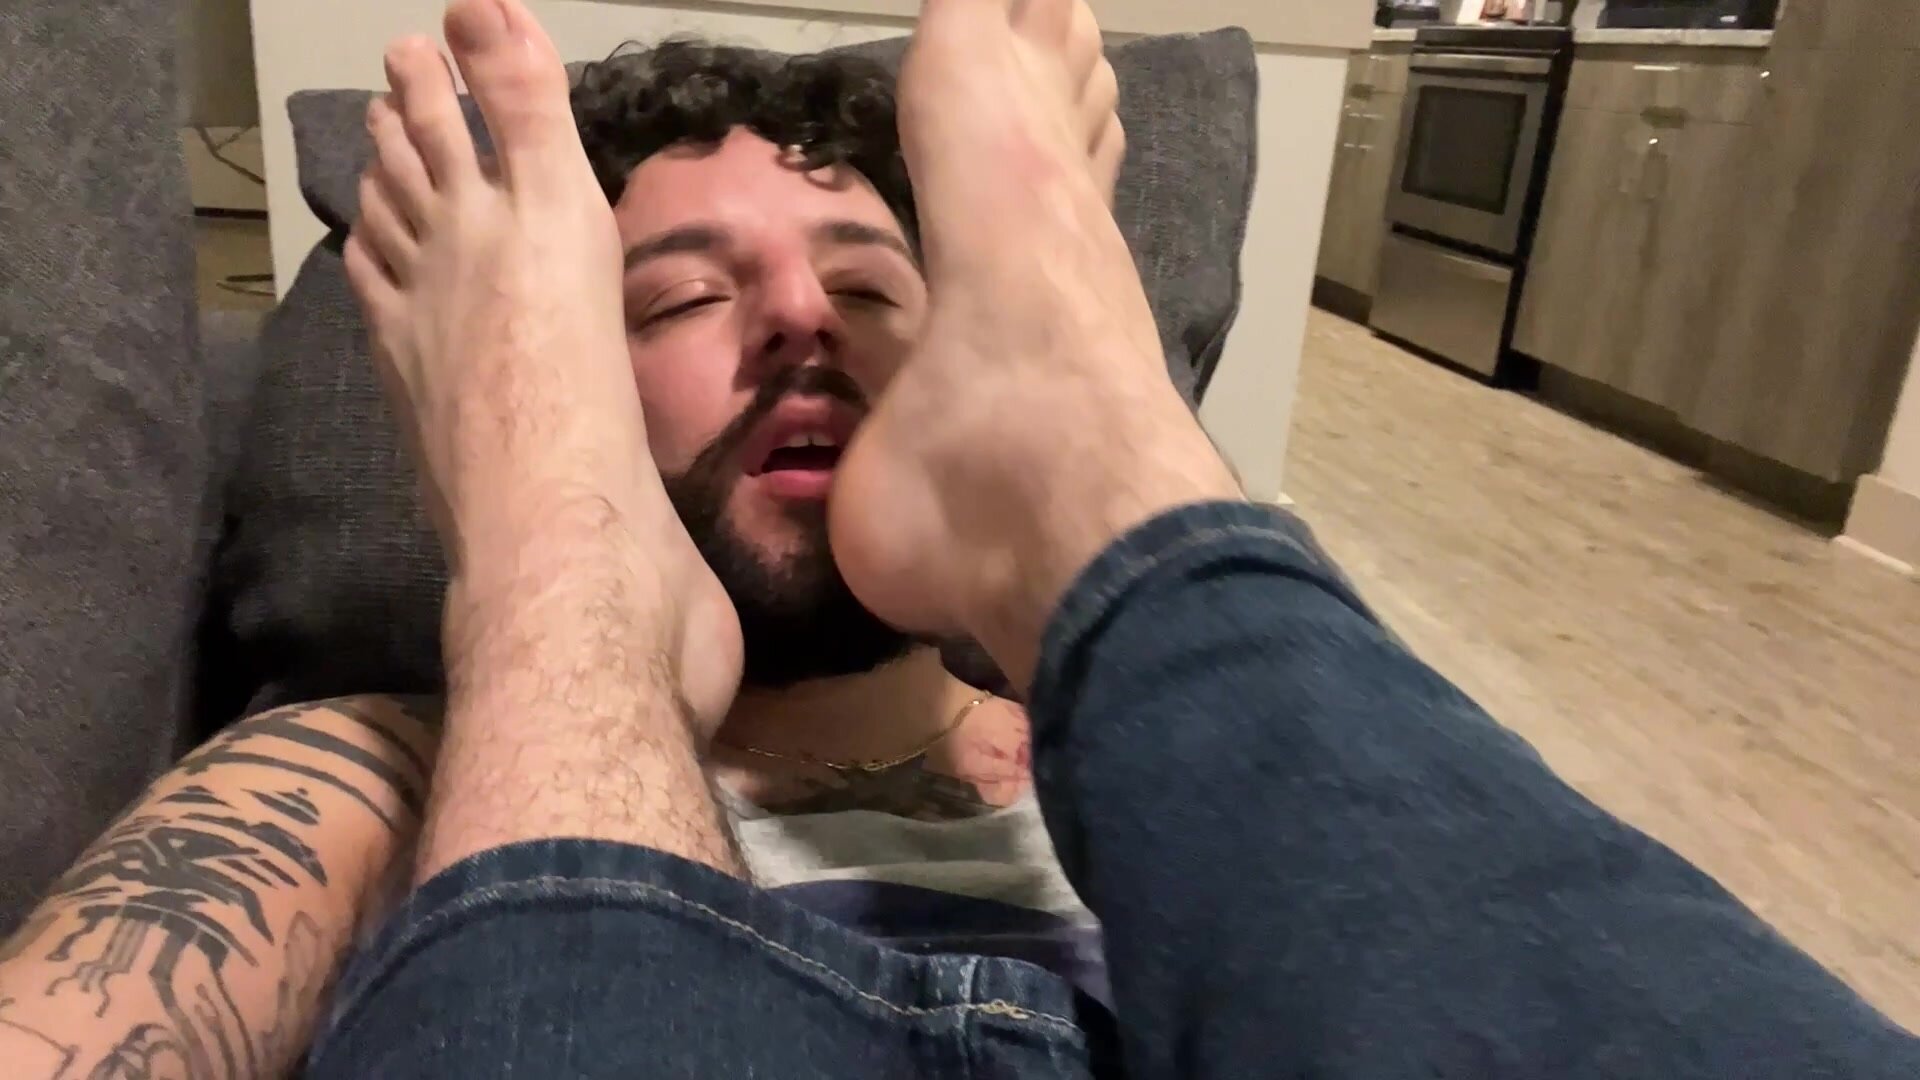 Foot Cleaner